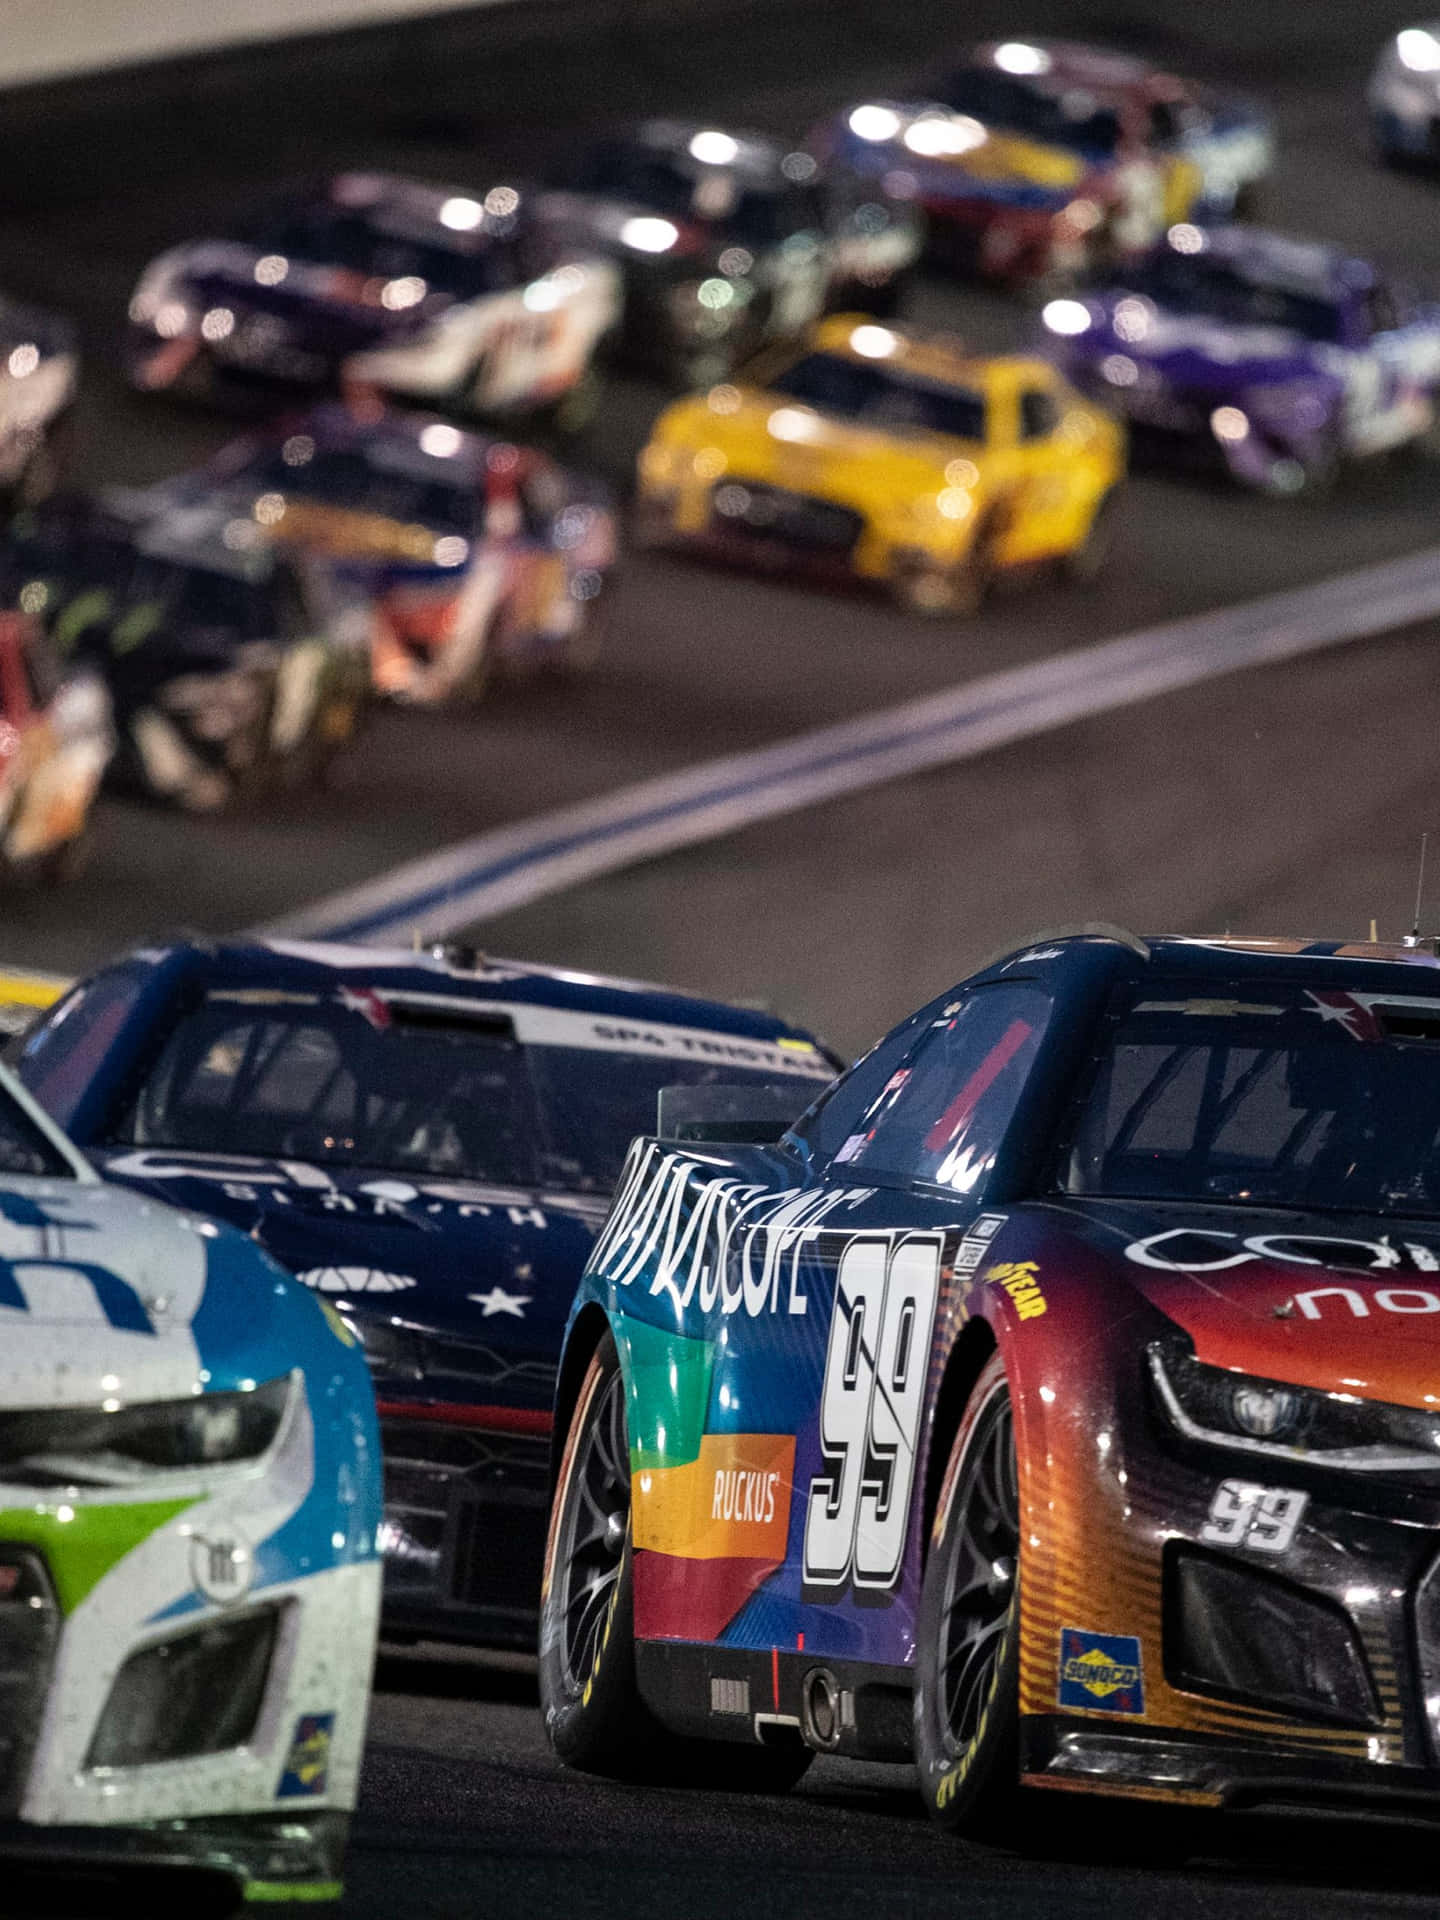 Nascar Races At Night With Cars In The Background Wallpaper